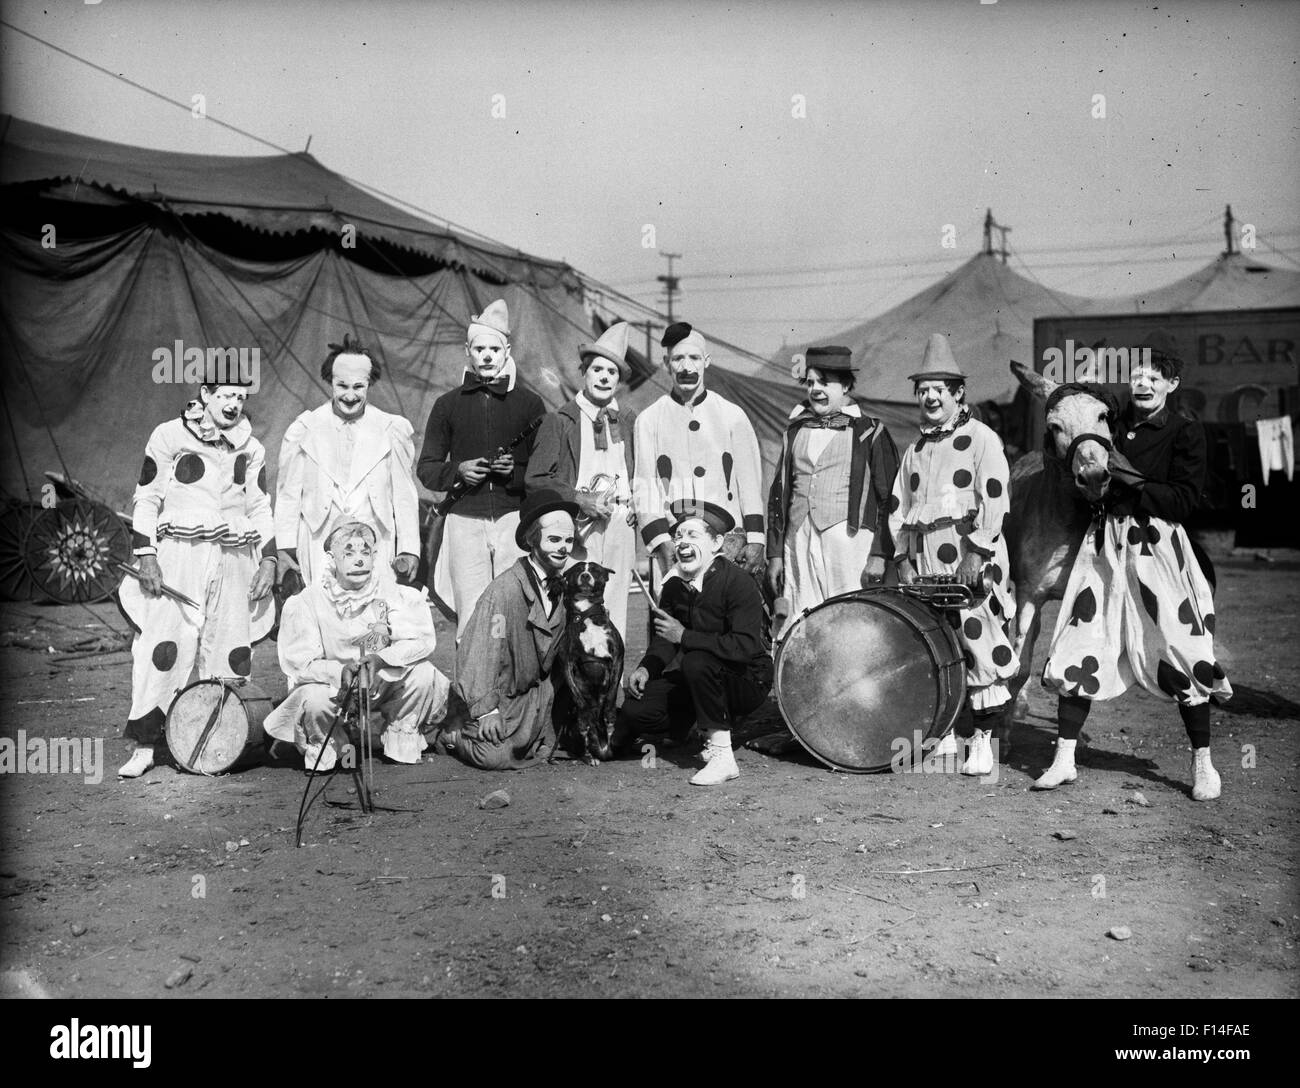 1930s GROUP PORTRAIT OF CLOWNS CIRCUS PERFORMERS POSING WITH ANIMALS AND MUSICAL INSTRUMENTS IN FRONT OF TENTS Stock Photo